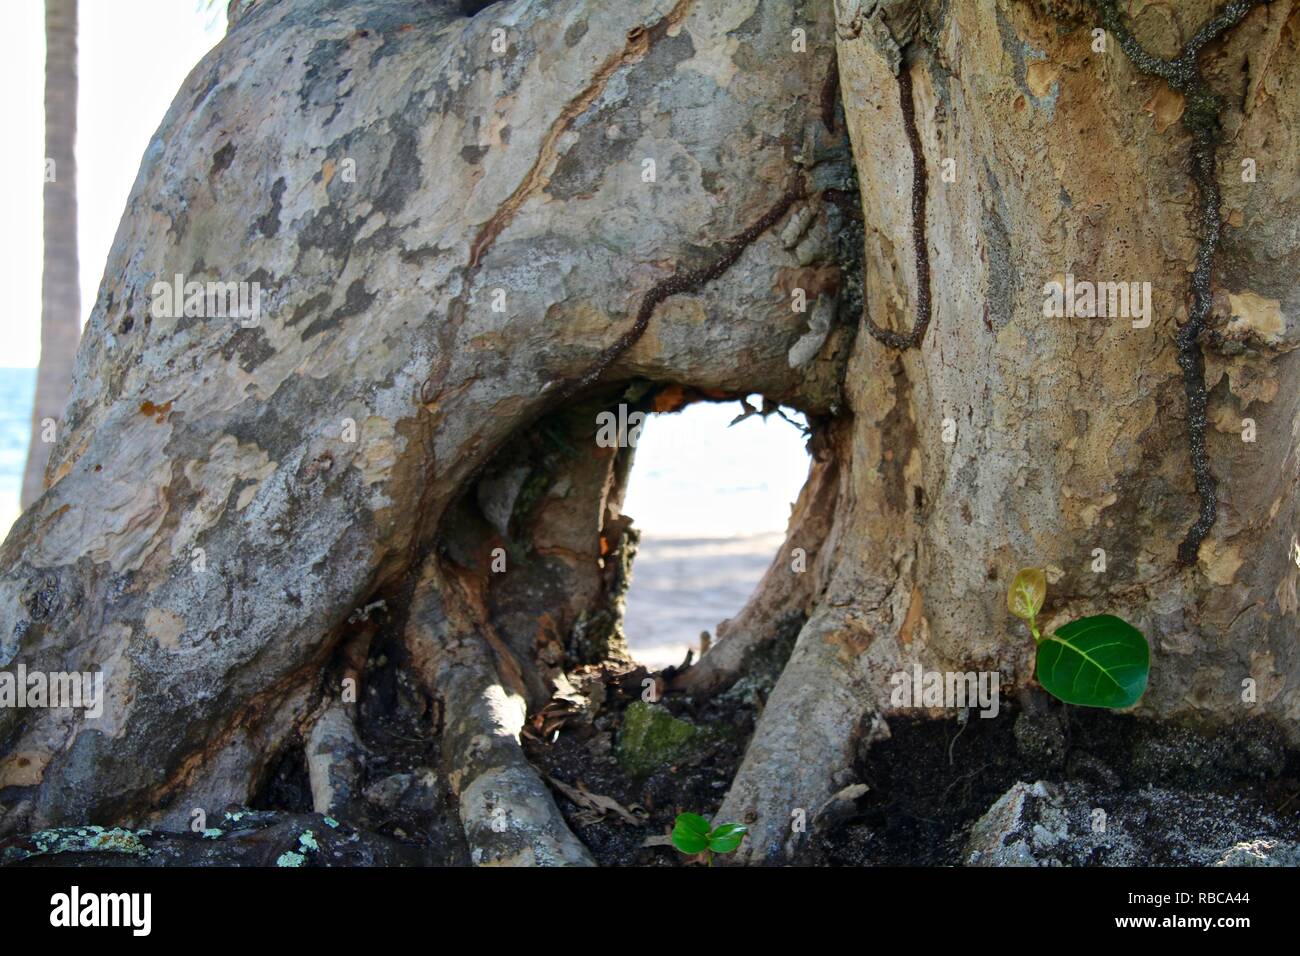 Looking through a tree to the Caribbean beyond Stock Photo